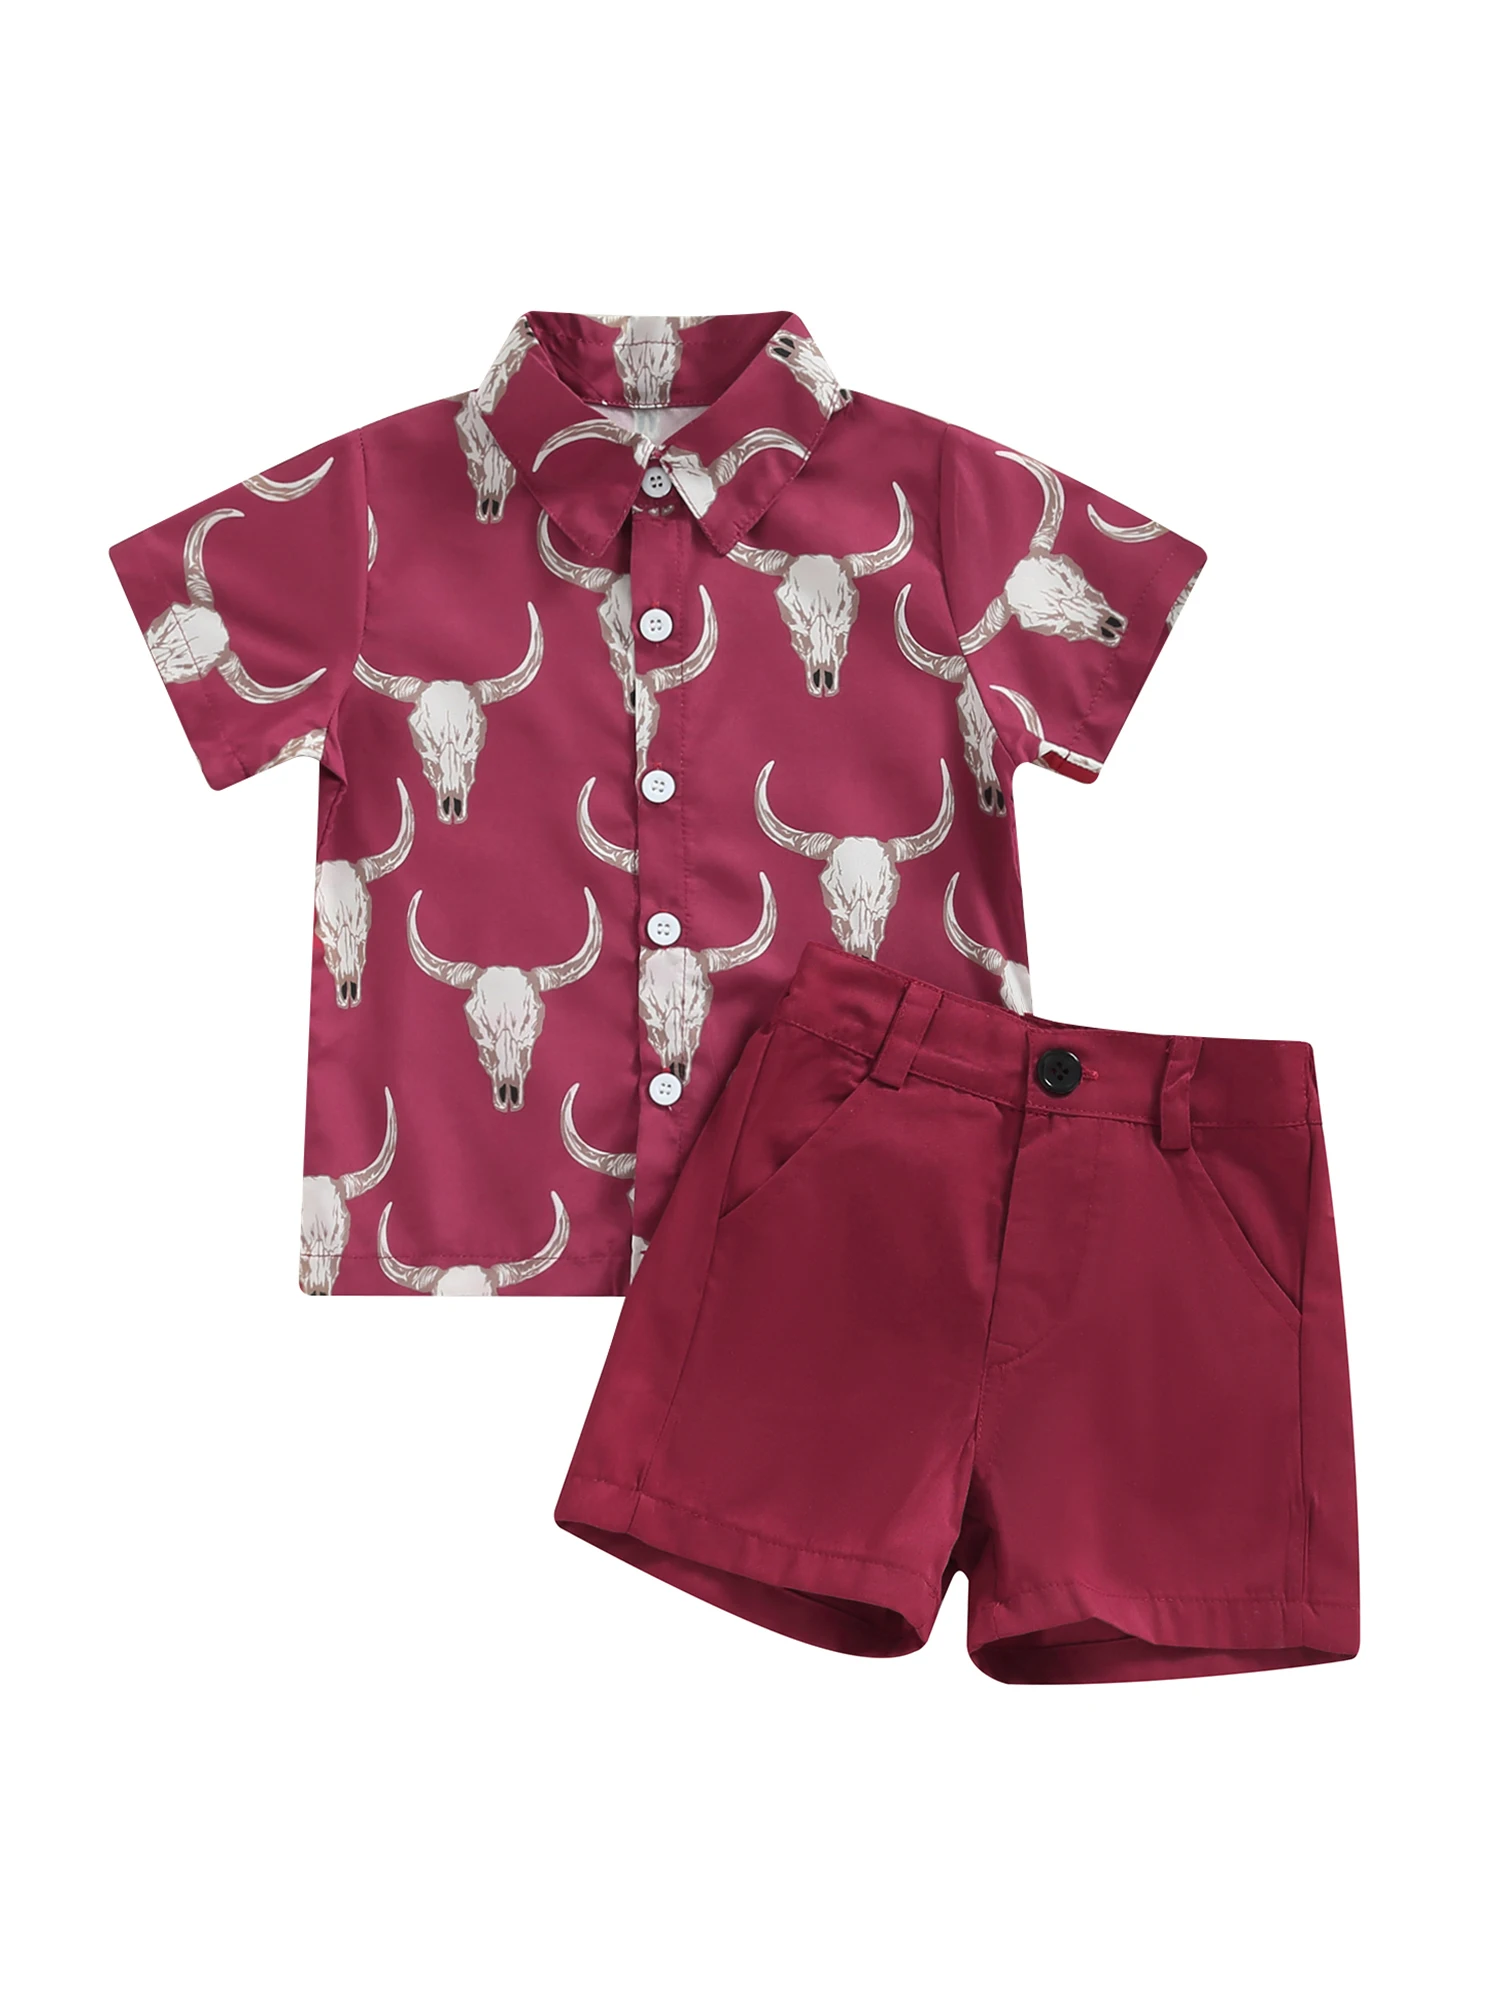 

Toddler Baby Boy Gentlemen Summer Clothes Cowboy Short Sleeve Button Down Shirts Solid Shorts 1T 2T 3T 4T 5T Outfits